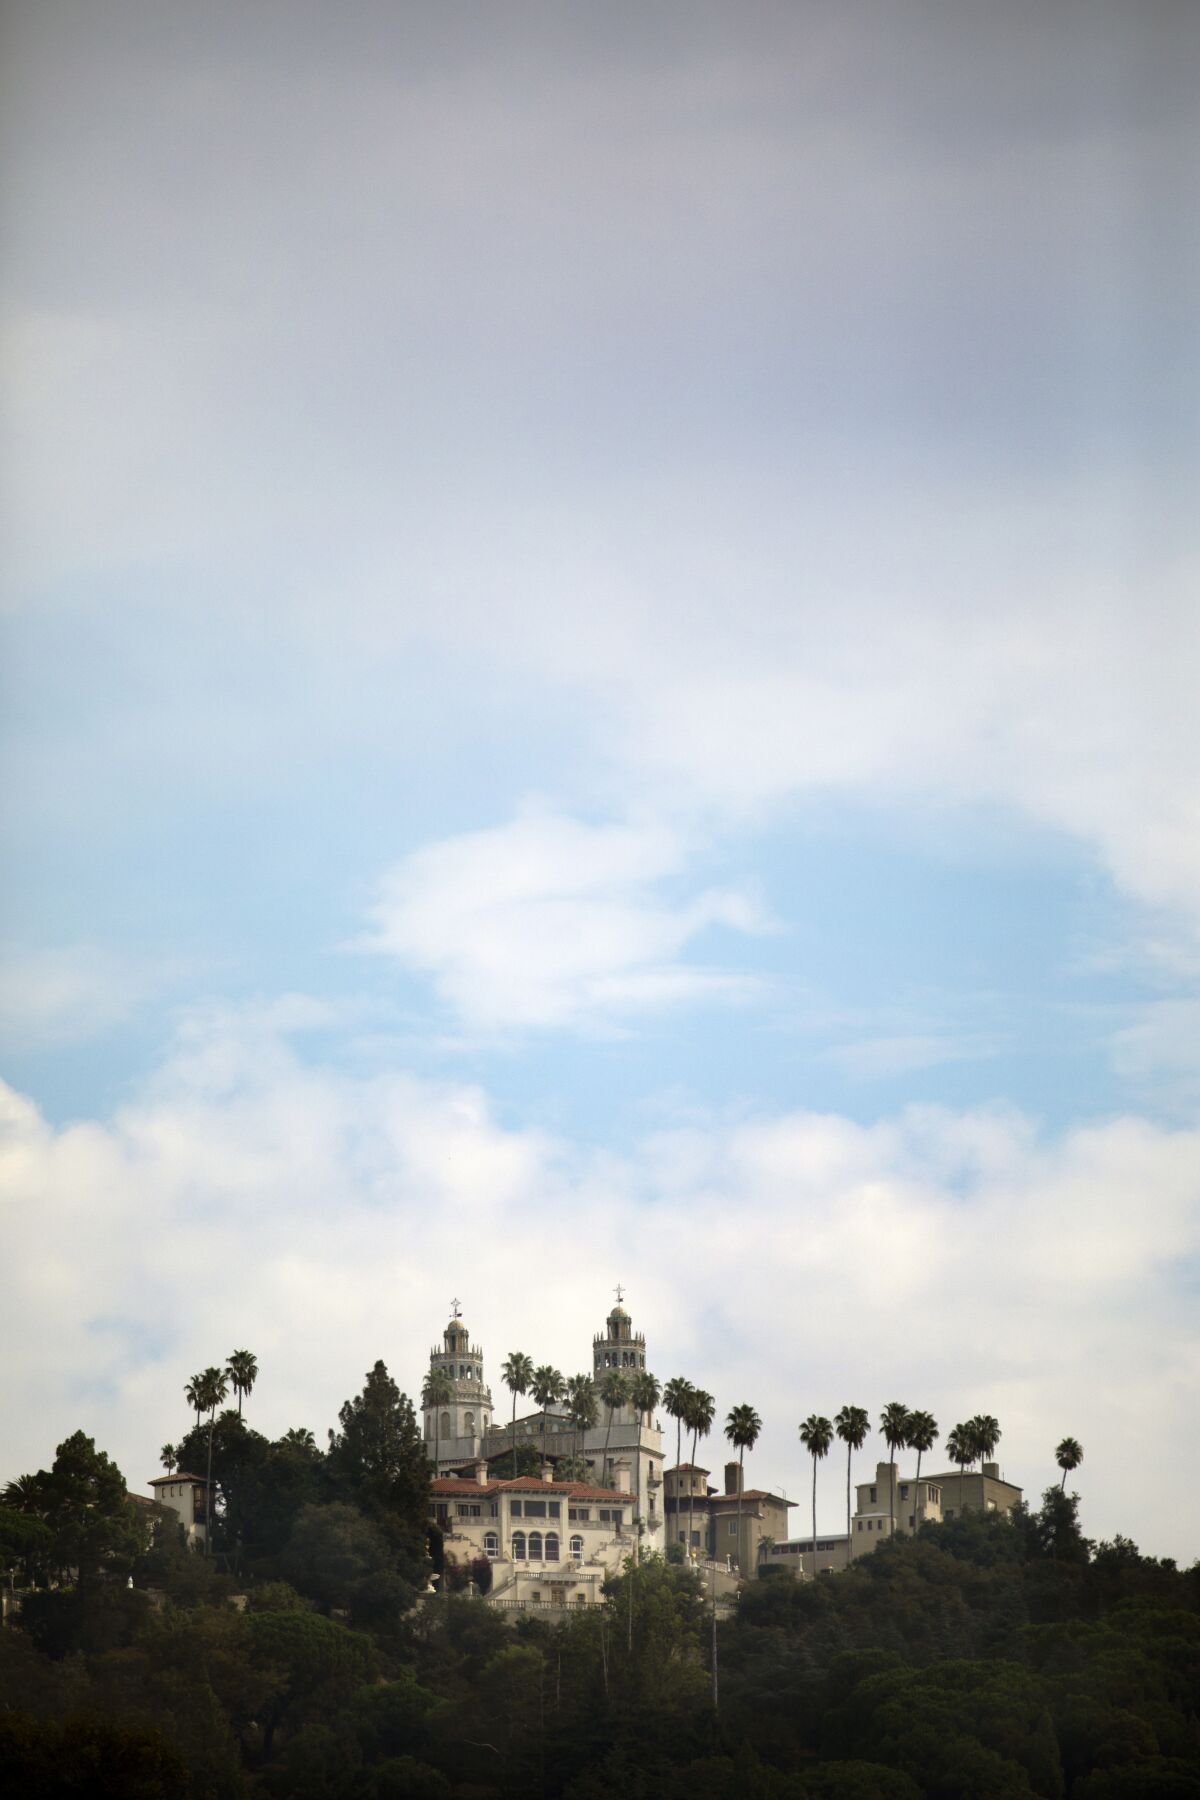 Hearst Castle in coastal San Simeon, Calif.: inspiration for a shimmering string of words and ideas.